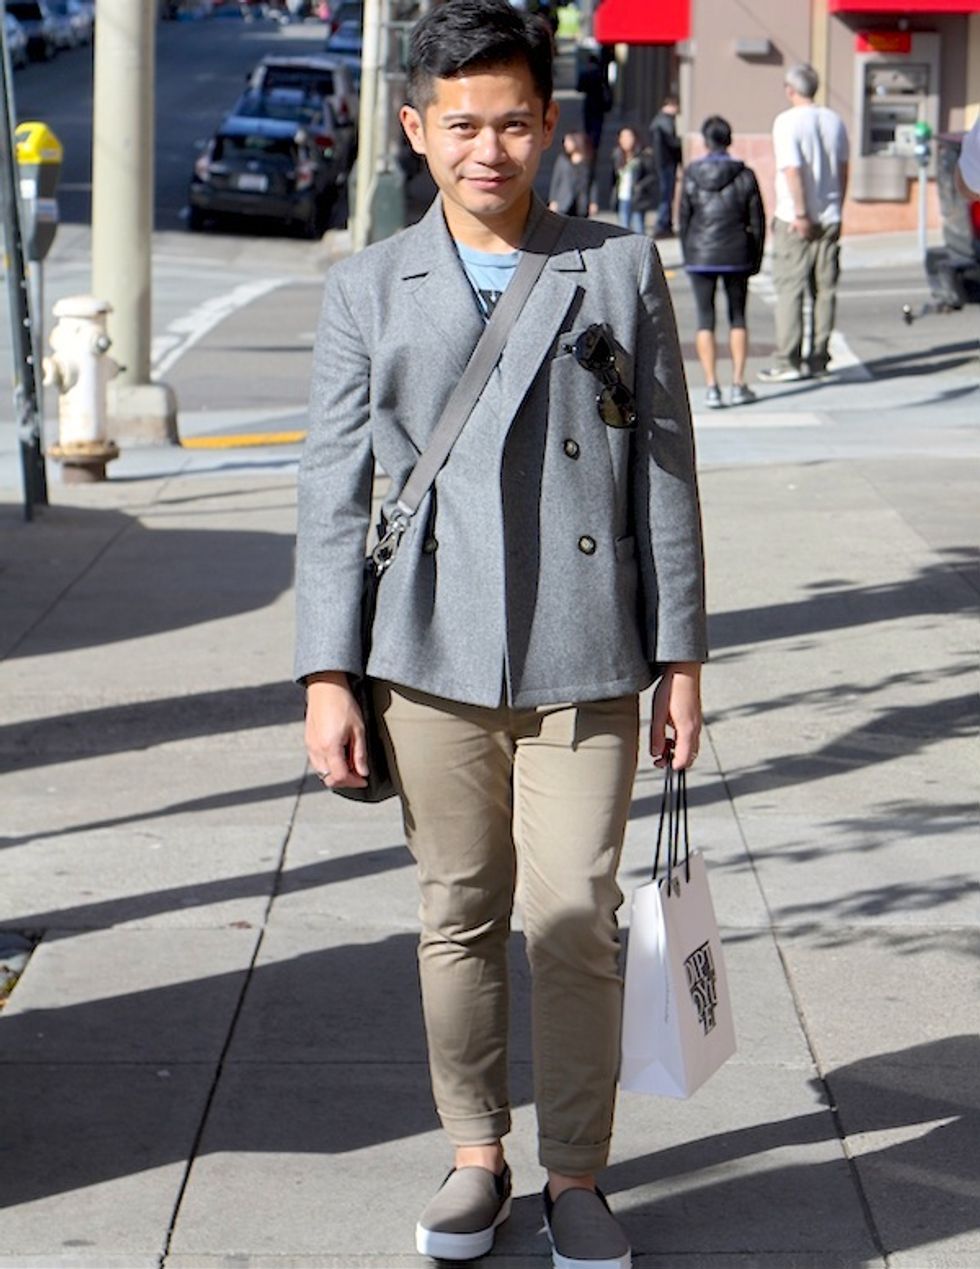 Street Style Report: Clean Lines and Subtle Details in Lower Pac Heights